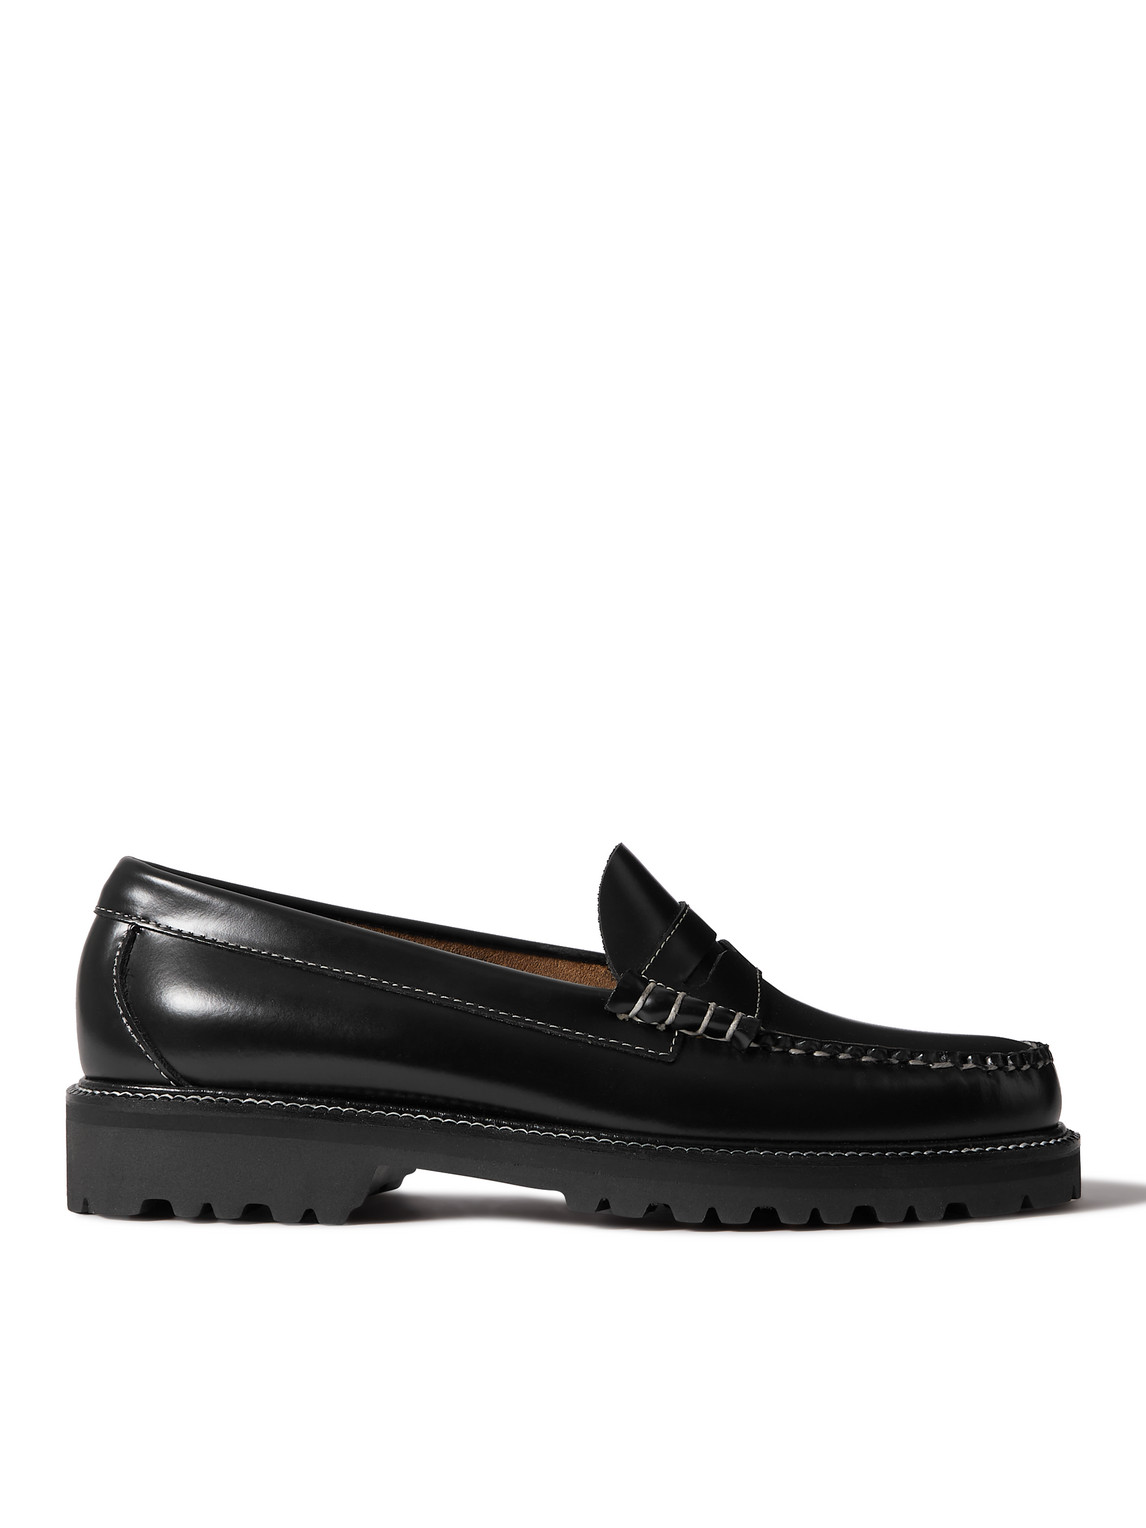 G.h. Bass & Co. Weejun 90 Larson Polished-leather Penny Loafers In Black